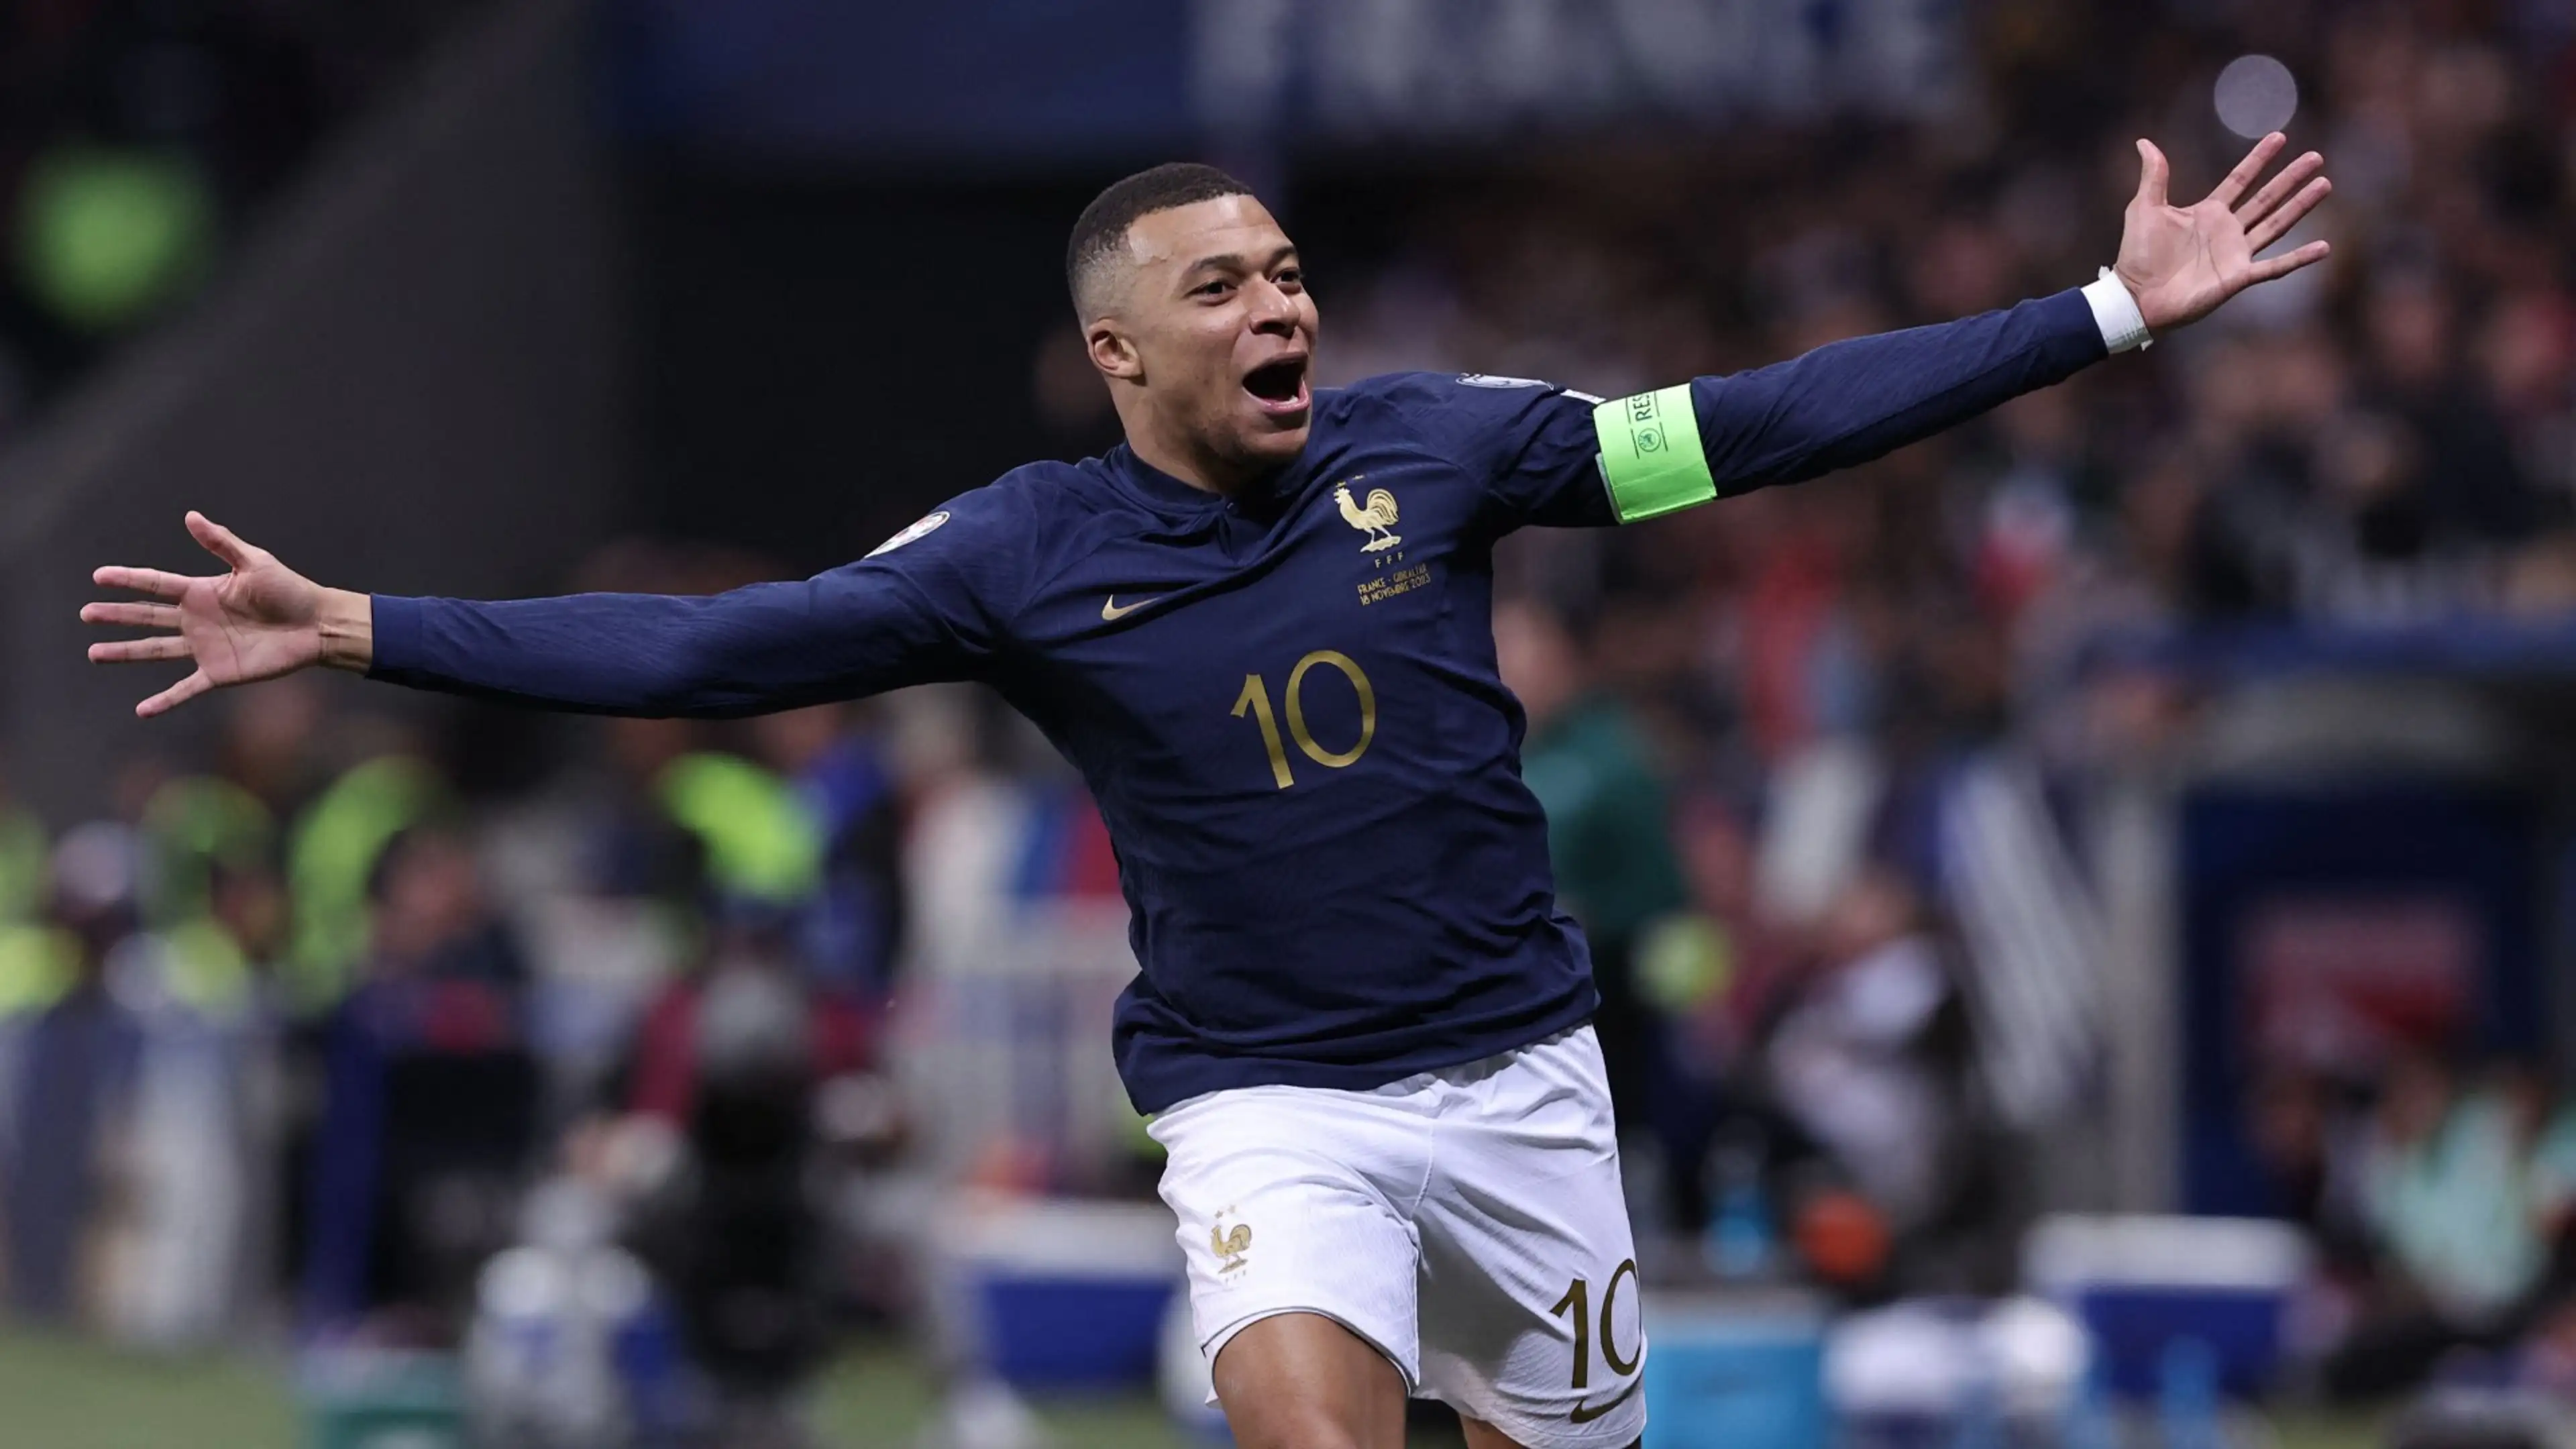 Kylian Mbappe Announces Departure from PSG, Pursued by Arsenal, Liverpool and Real Madrid